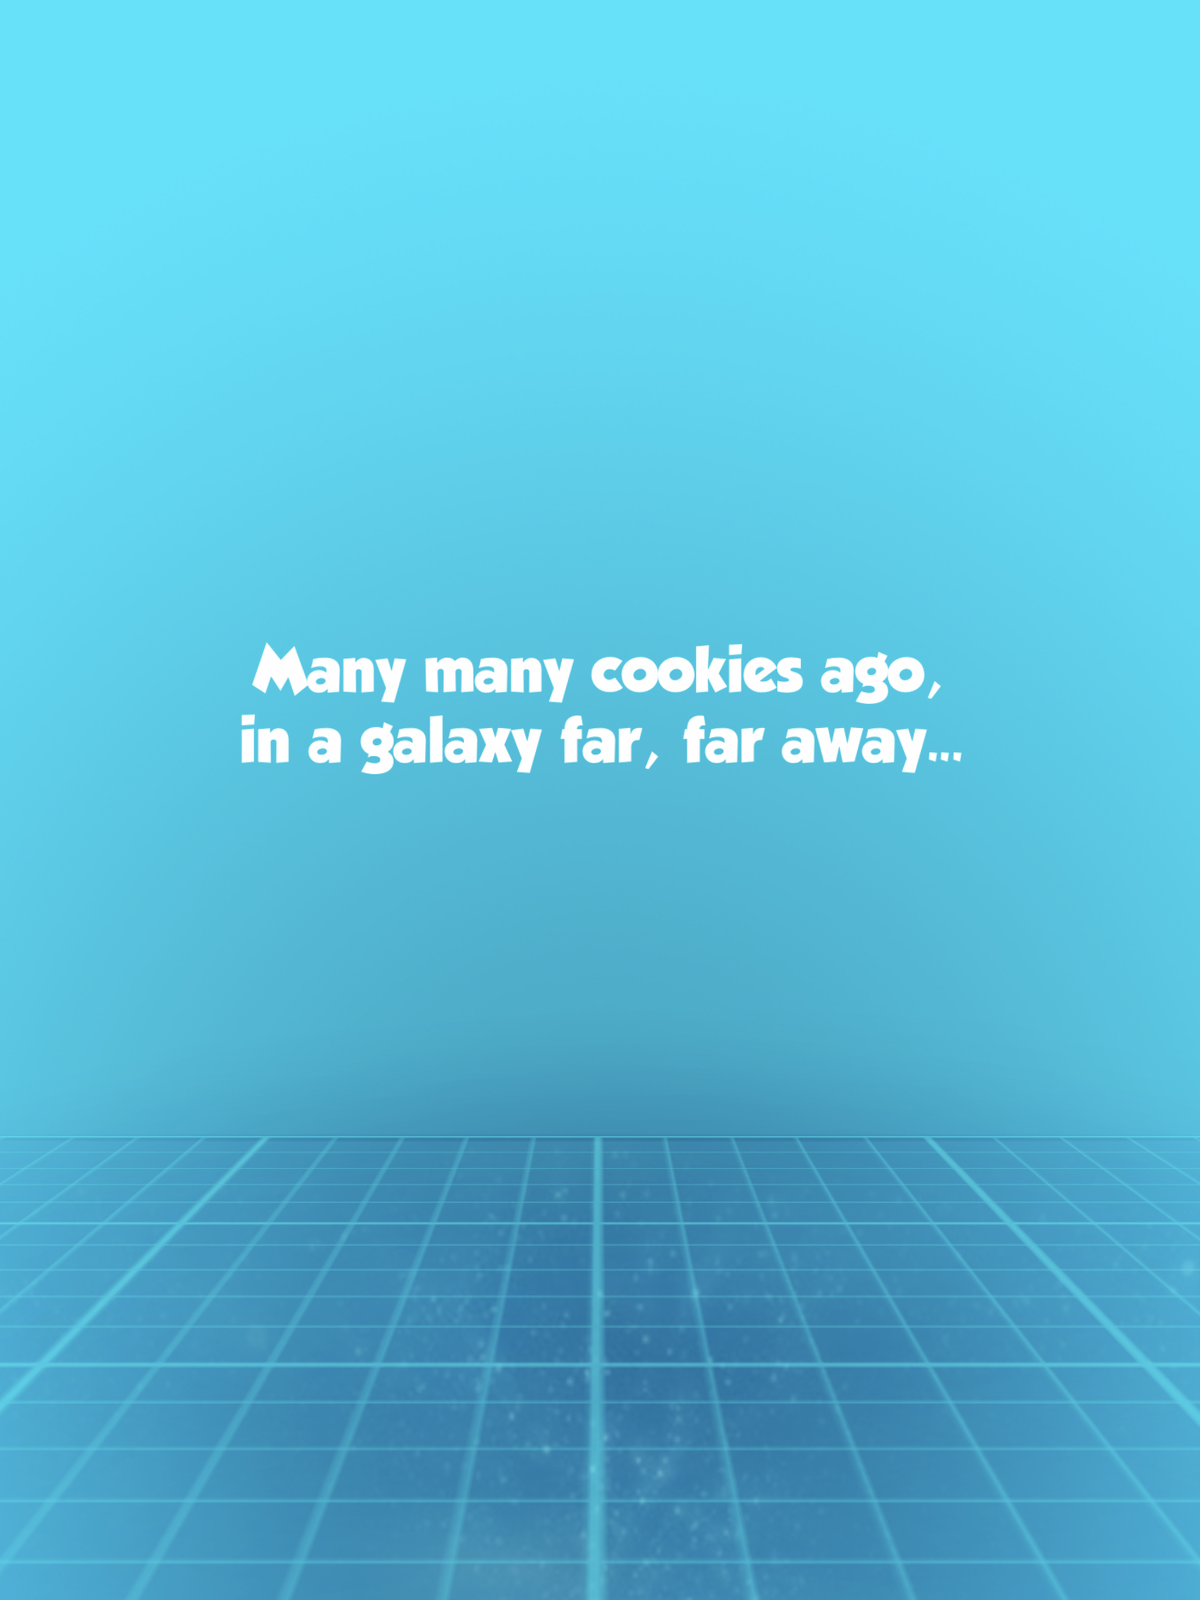 Cookie Domination, Cookie Clickers 2 (mobile) Wiki